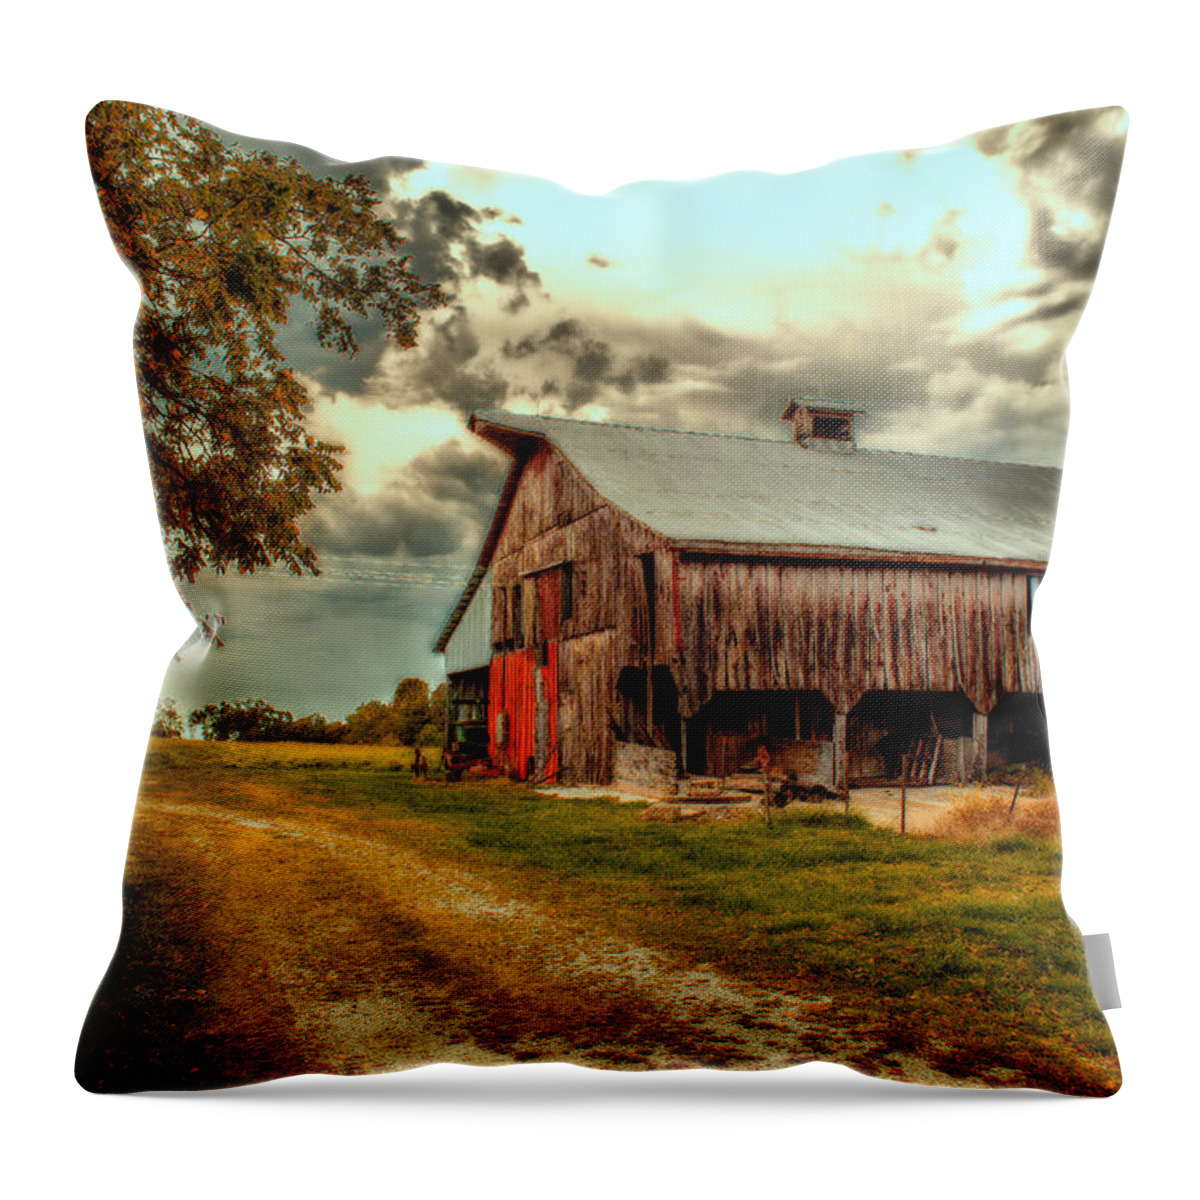 Barn Throw Pillow featuring the photograph This Old Barn by Bill and Linda Tiepelman